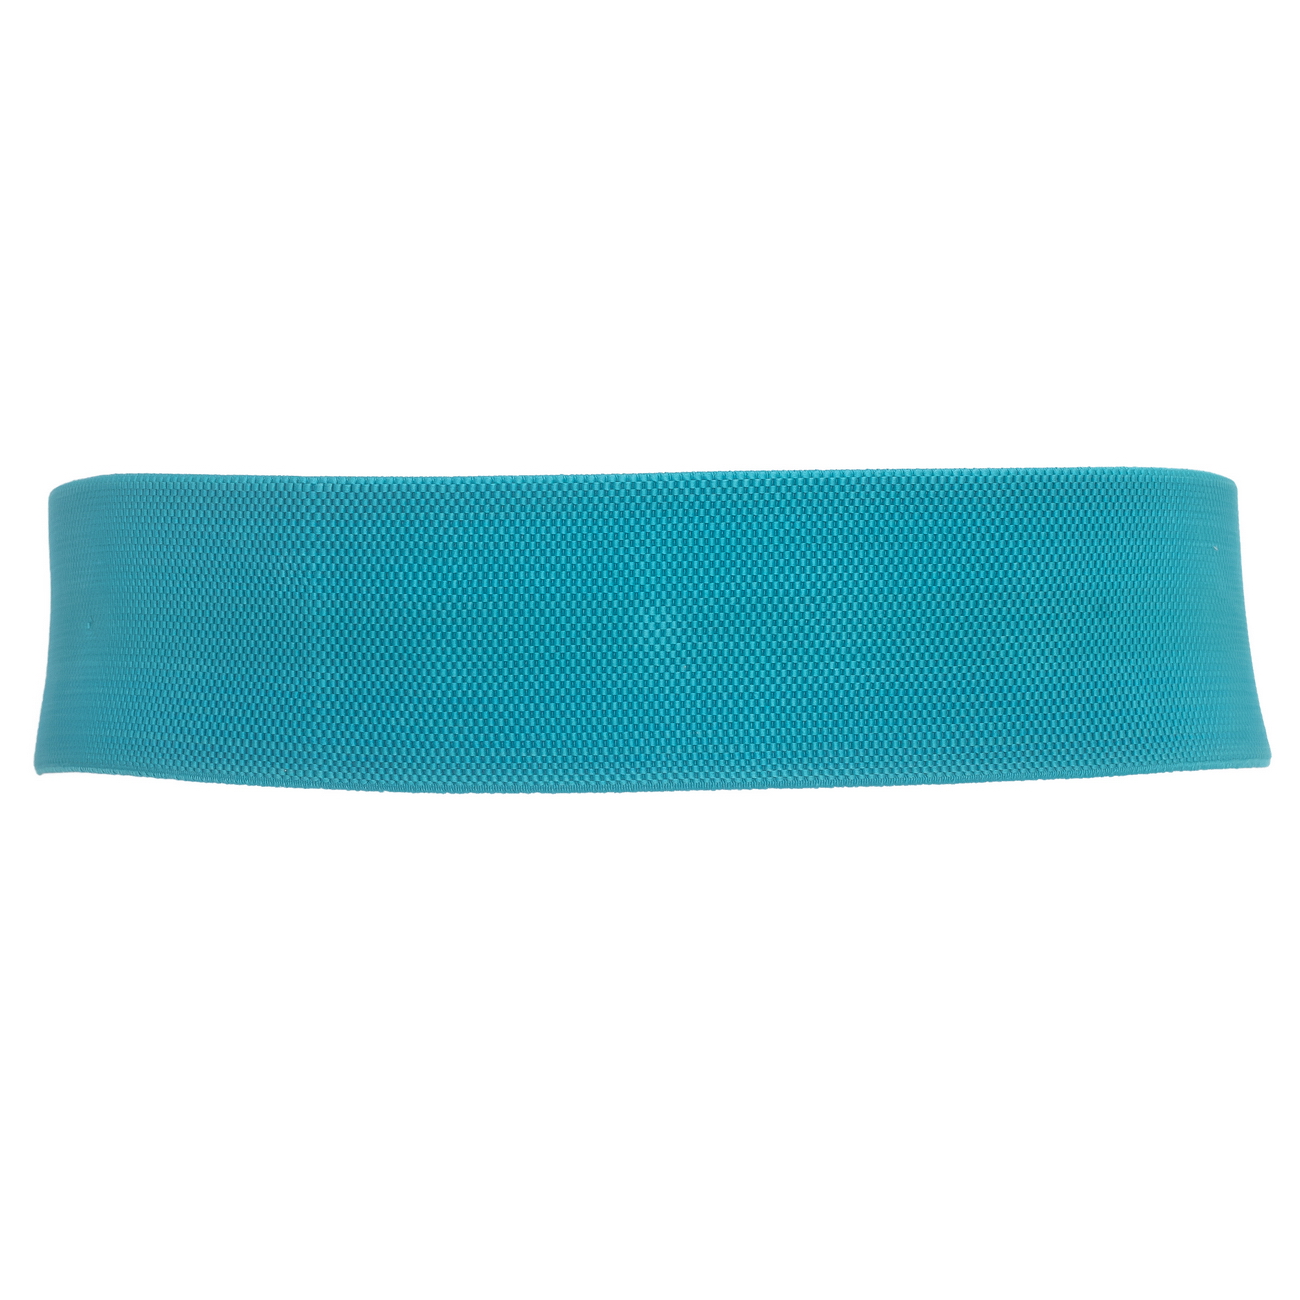 Plus Size Leatherette O-ring Buckle Elastic Wide Fashion Belt Teal Photo 2